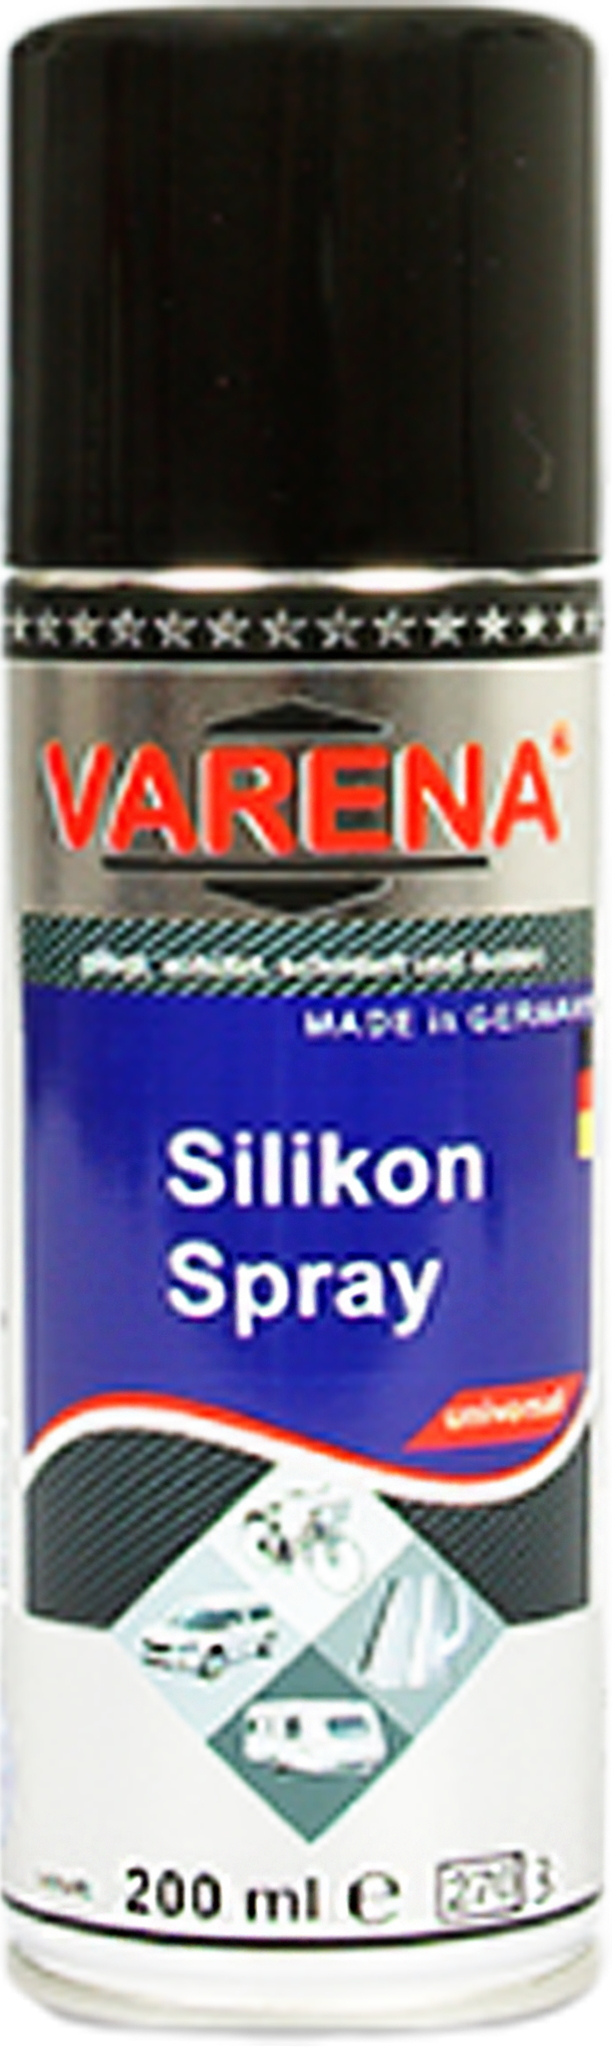 Picture of Silikonspray